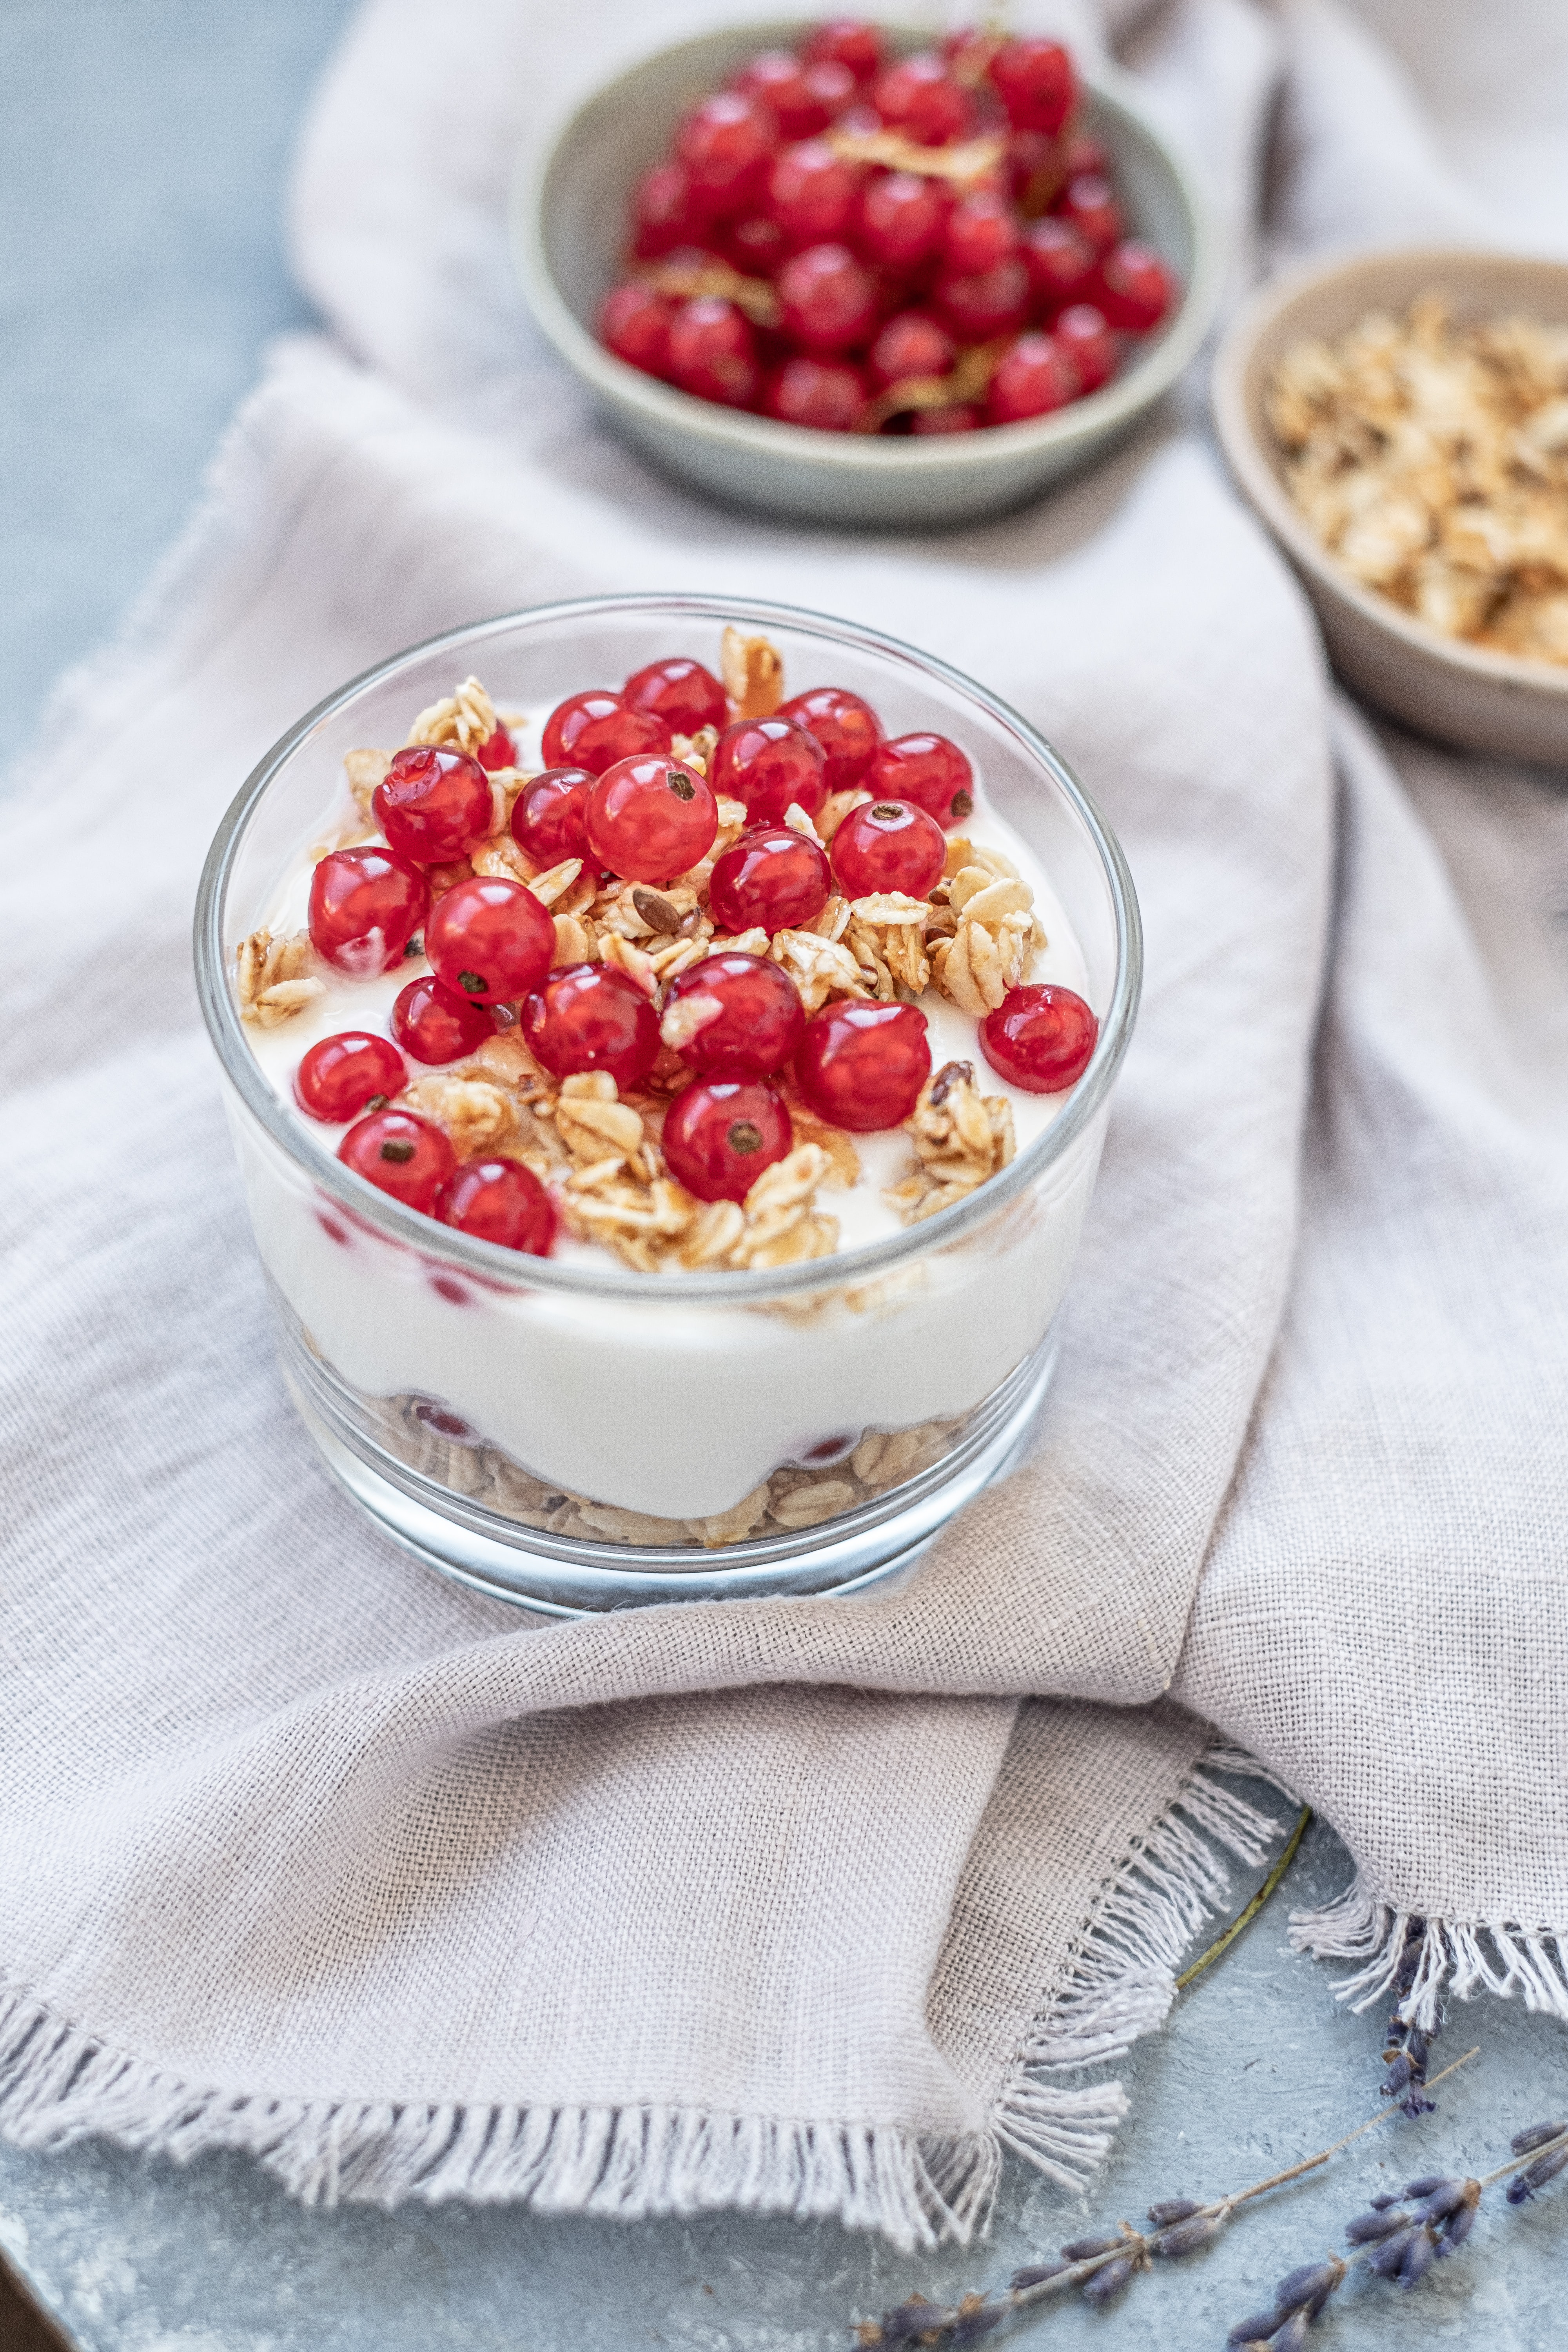 Yogurt with small berries and grains.